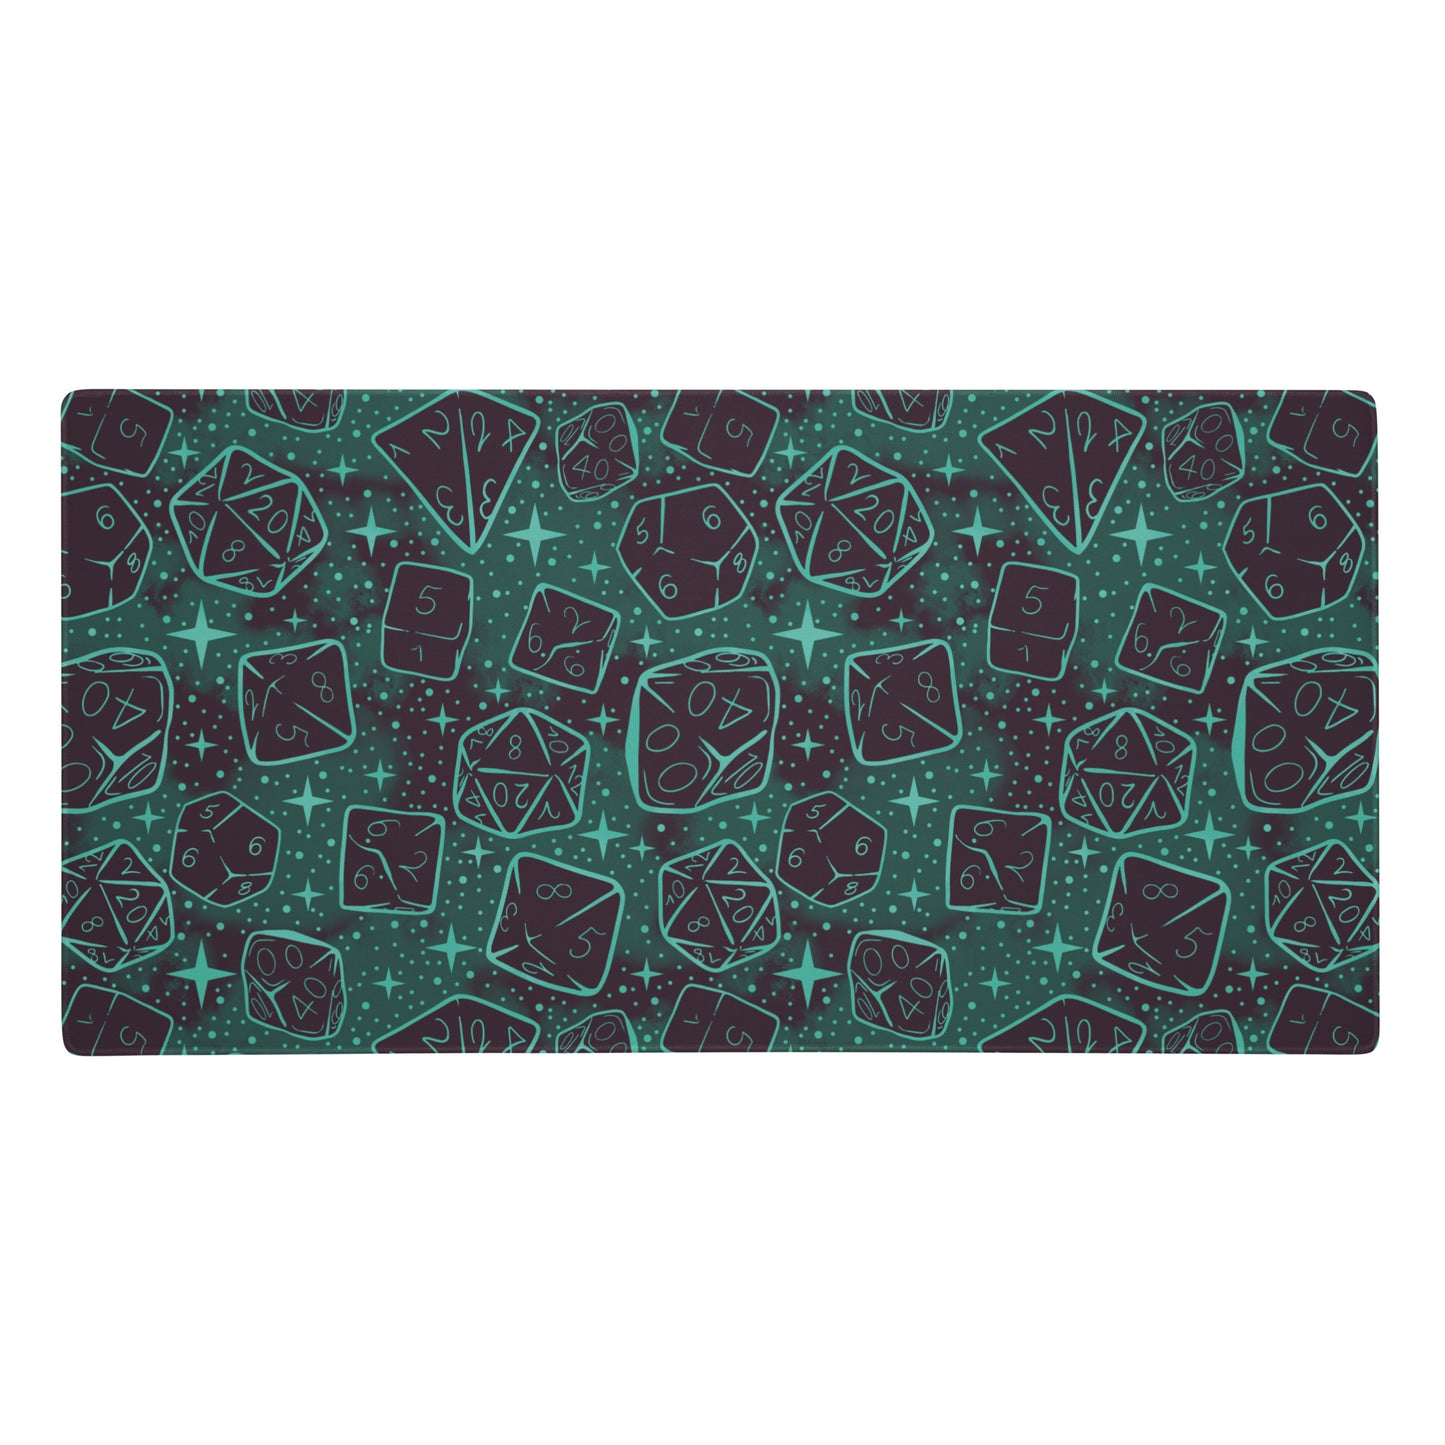 Dusk Version: Dice Pattern, Gaming Desk Mat | Dungeons and Dragons